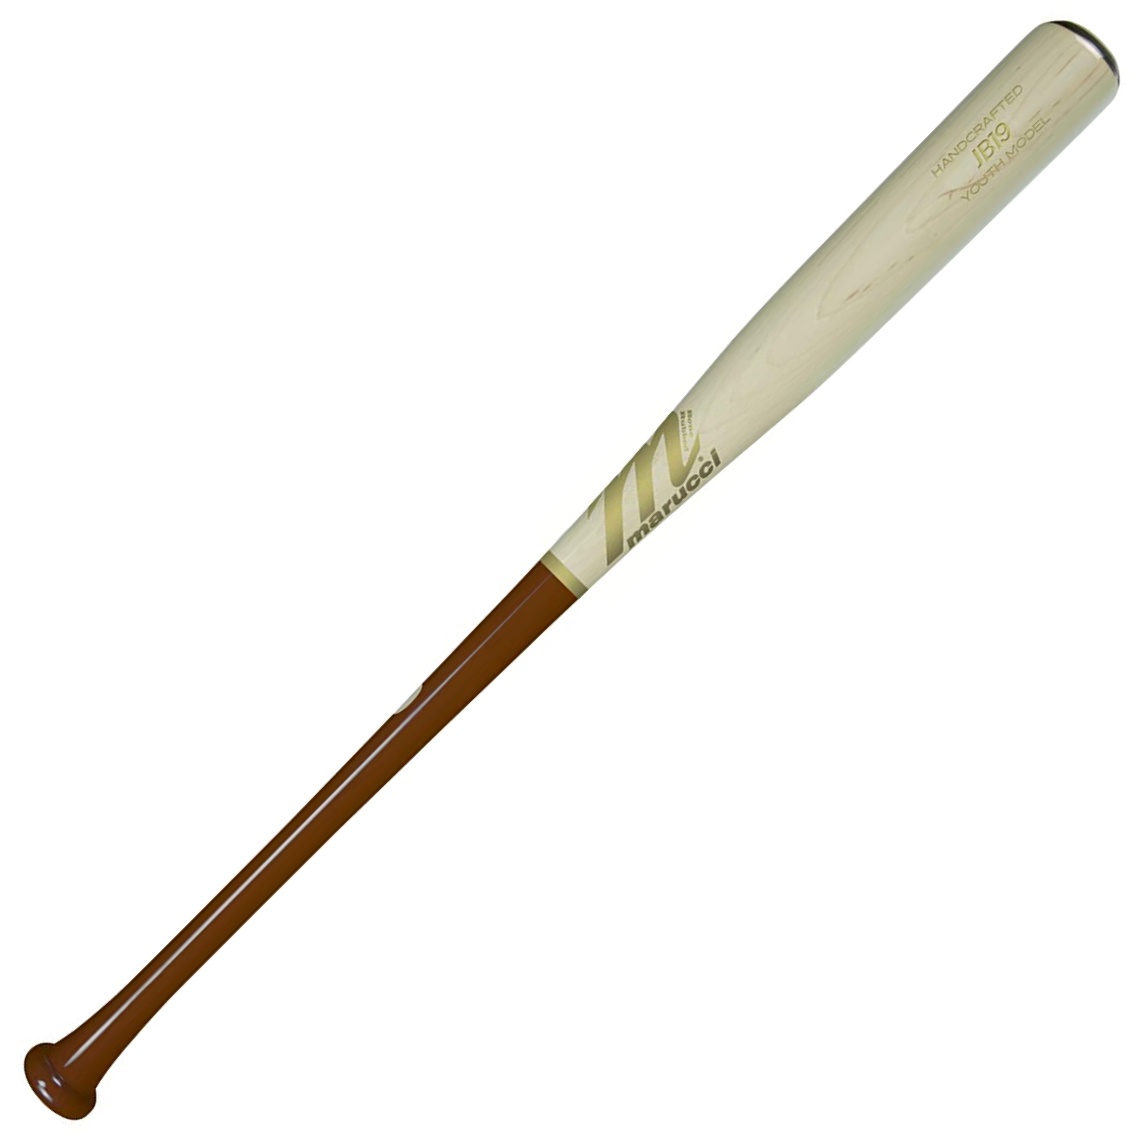 marucci-jb19-pro-youth-maple-youth-wood-baseball-bat-30-inch MYVE2JB19-WTWW-30 Marucci 840058701005 <p>he versatile bat for the versatile hitter. We know your kind.